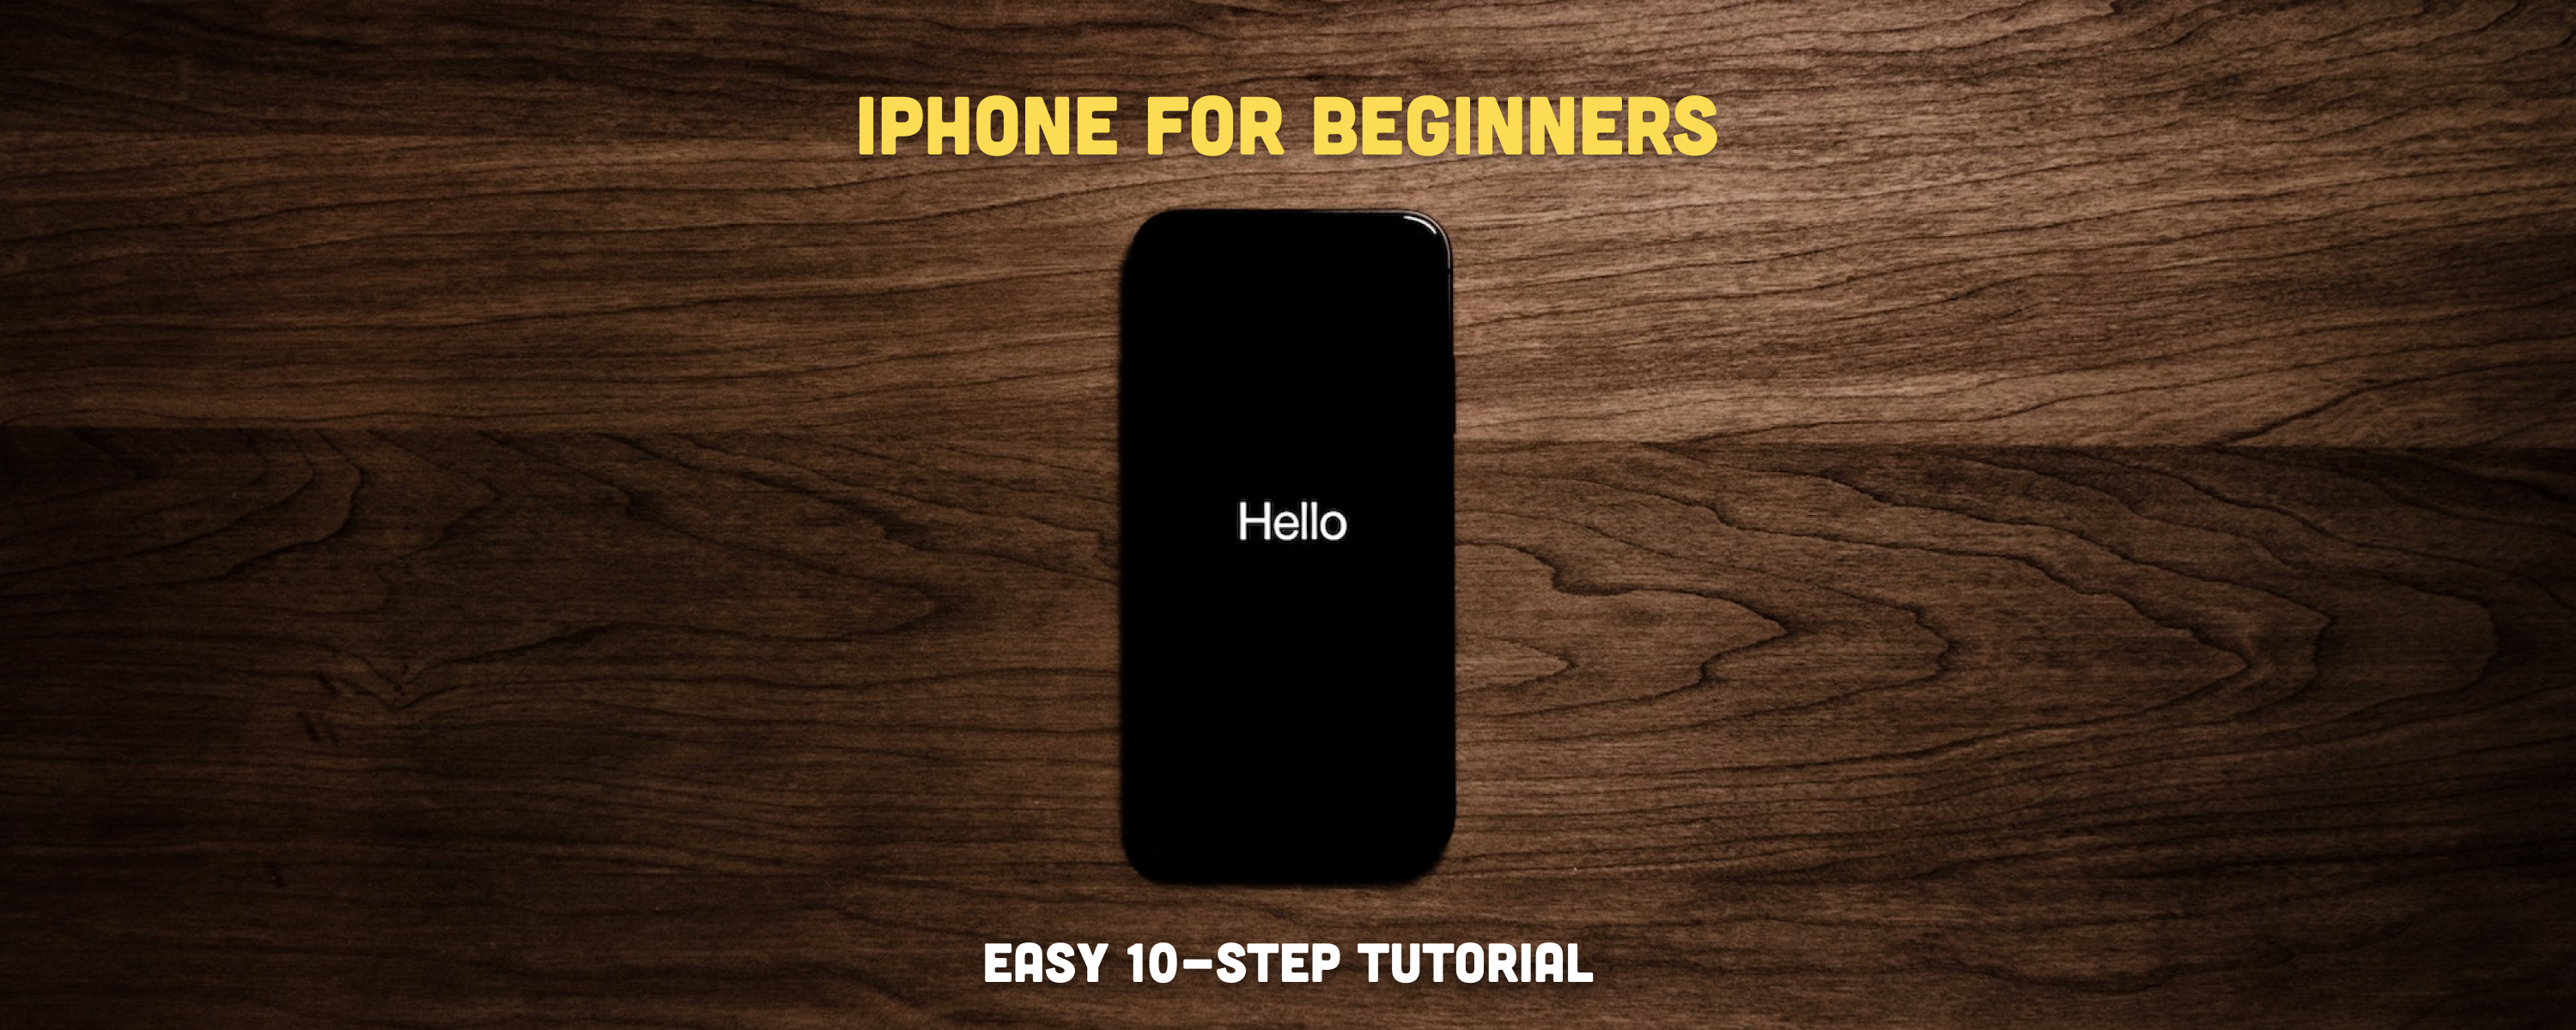 iPhone for Beginners: An Easy 10-Step Tutorial